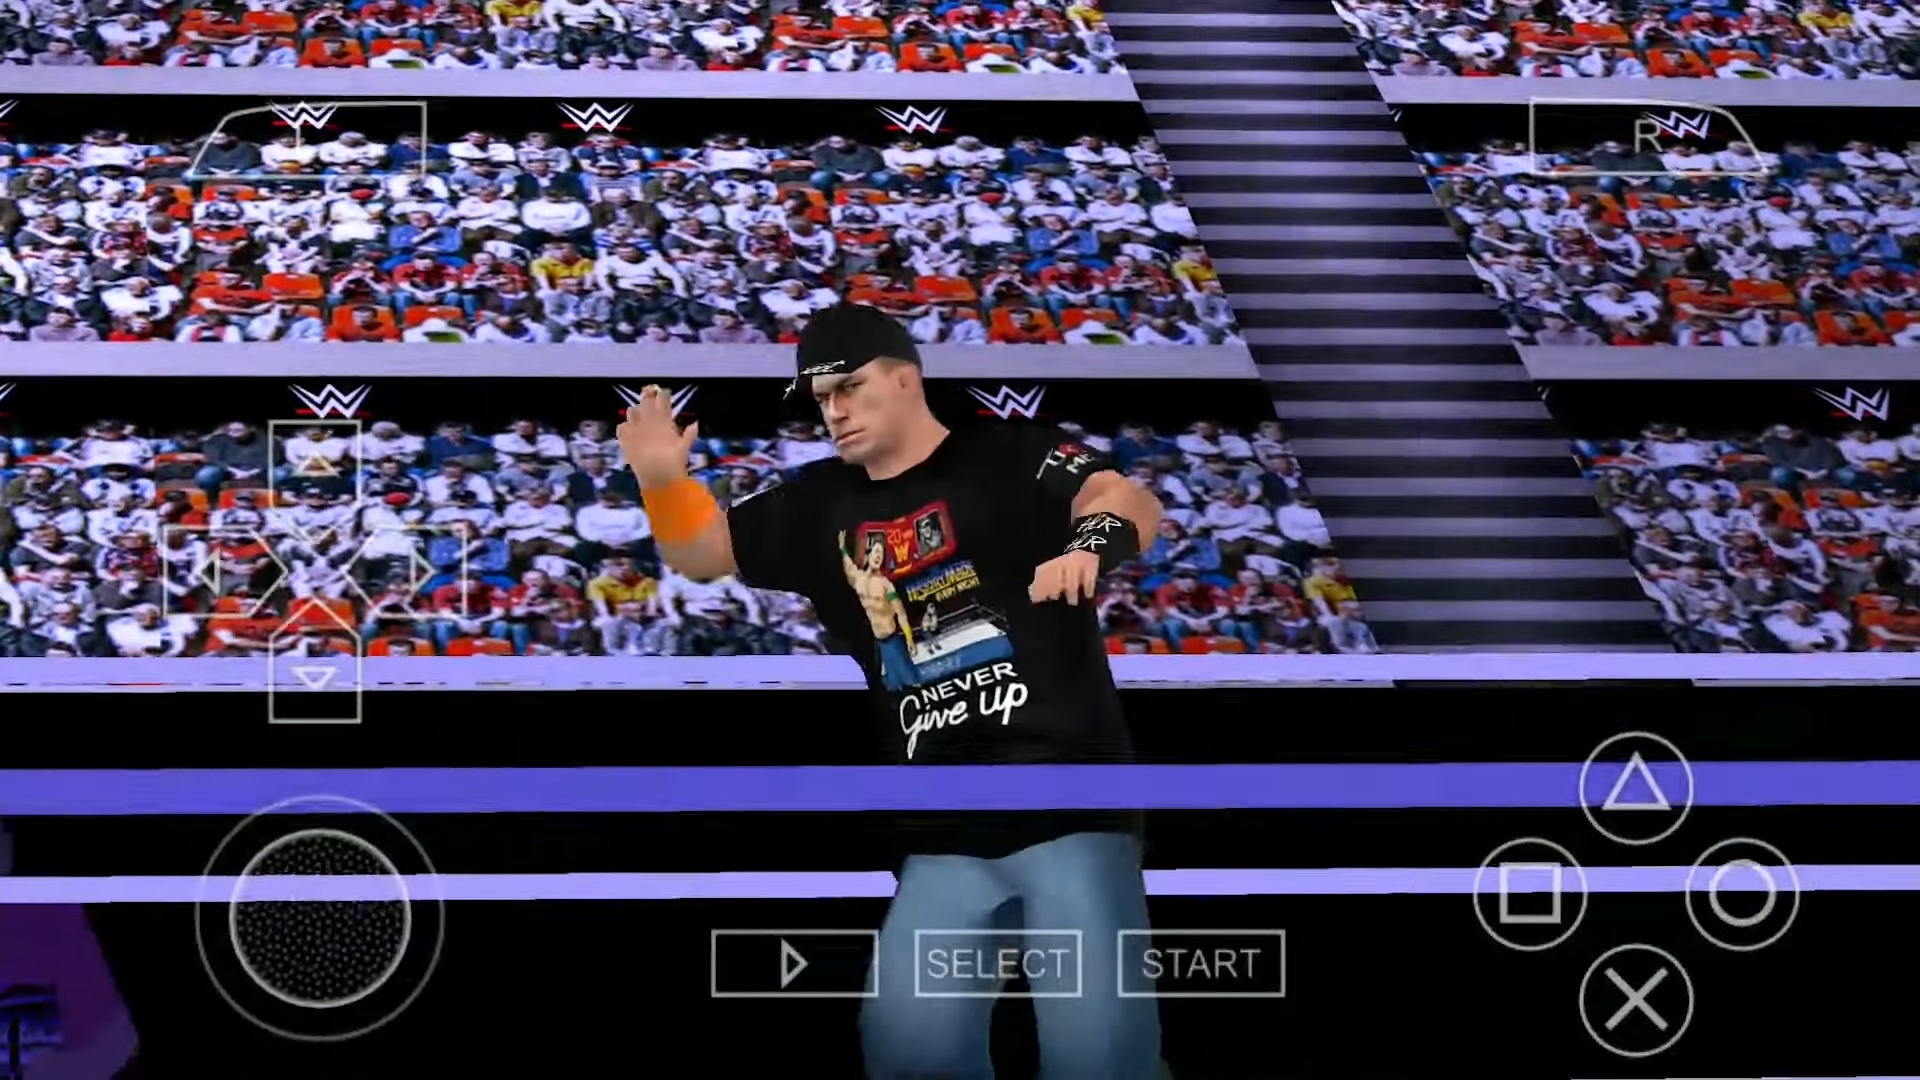 800MB) WWE 2K23 PPSSPP Highly Compressed (Fan Made)